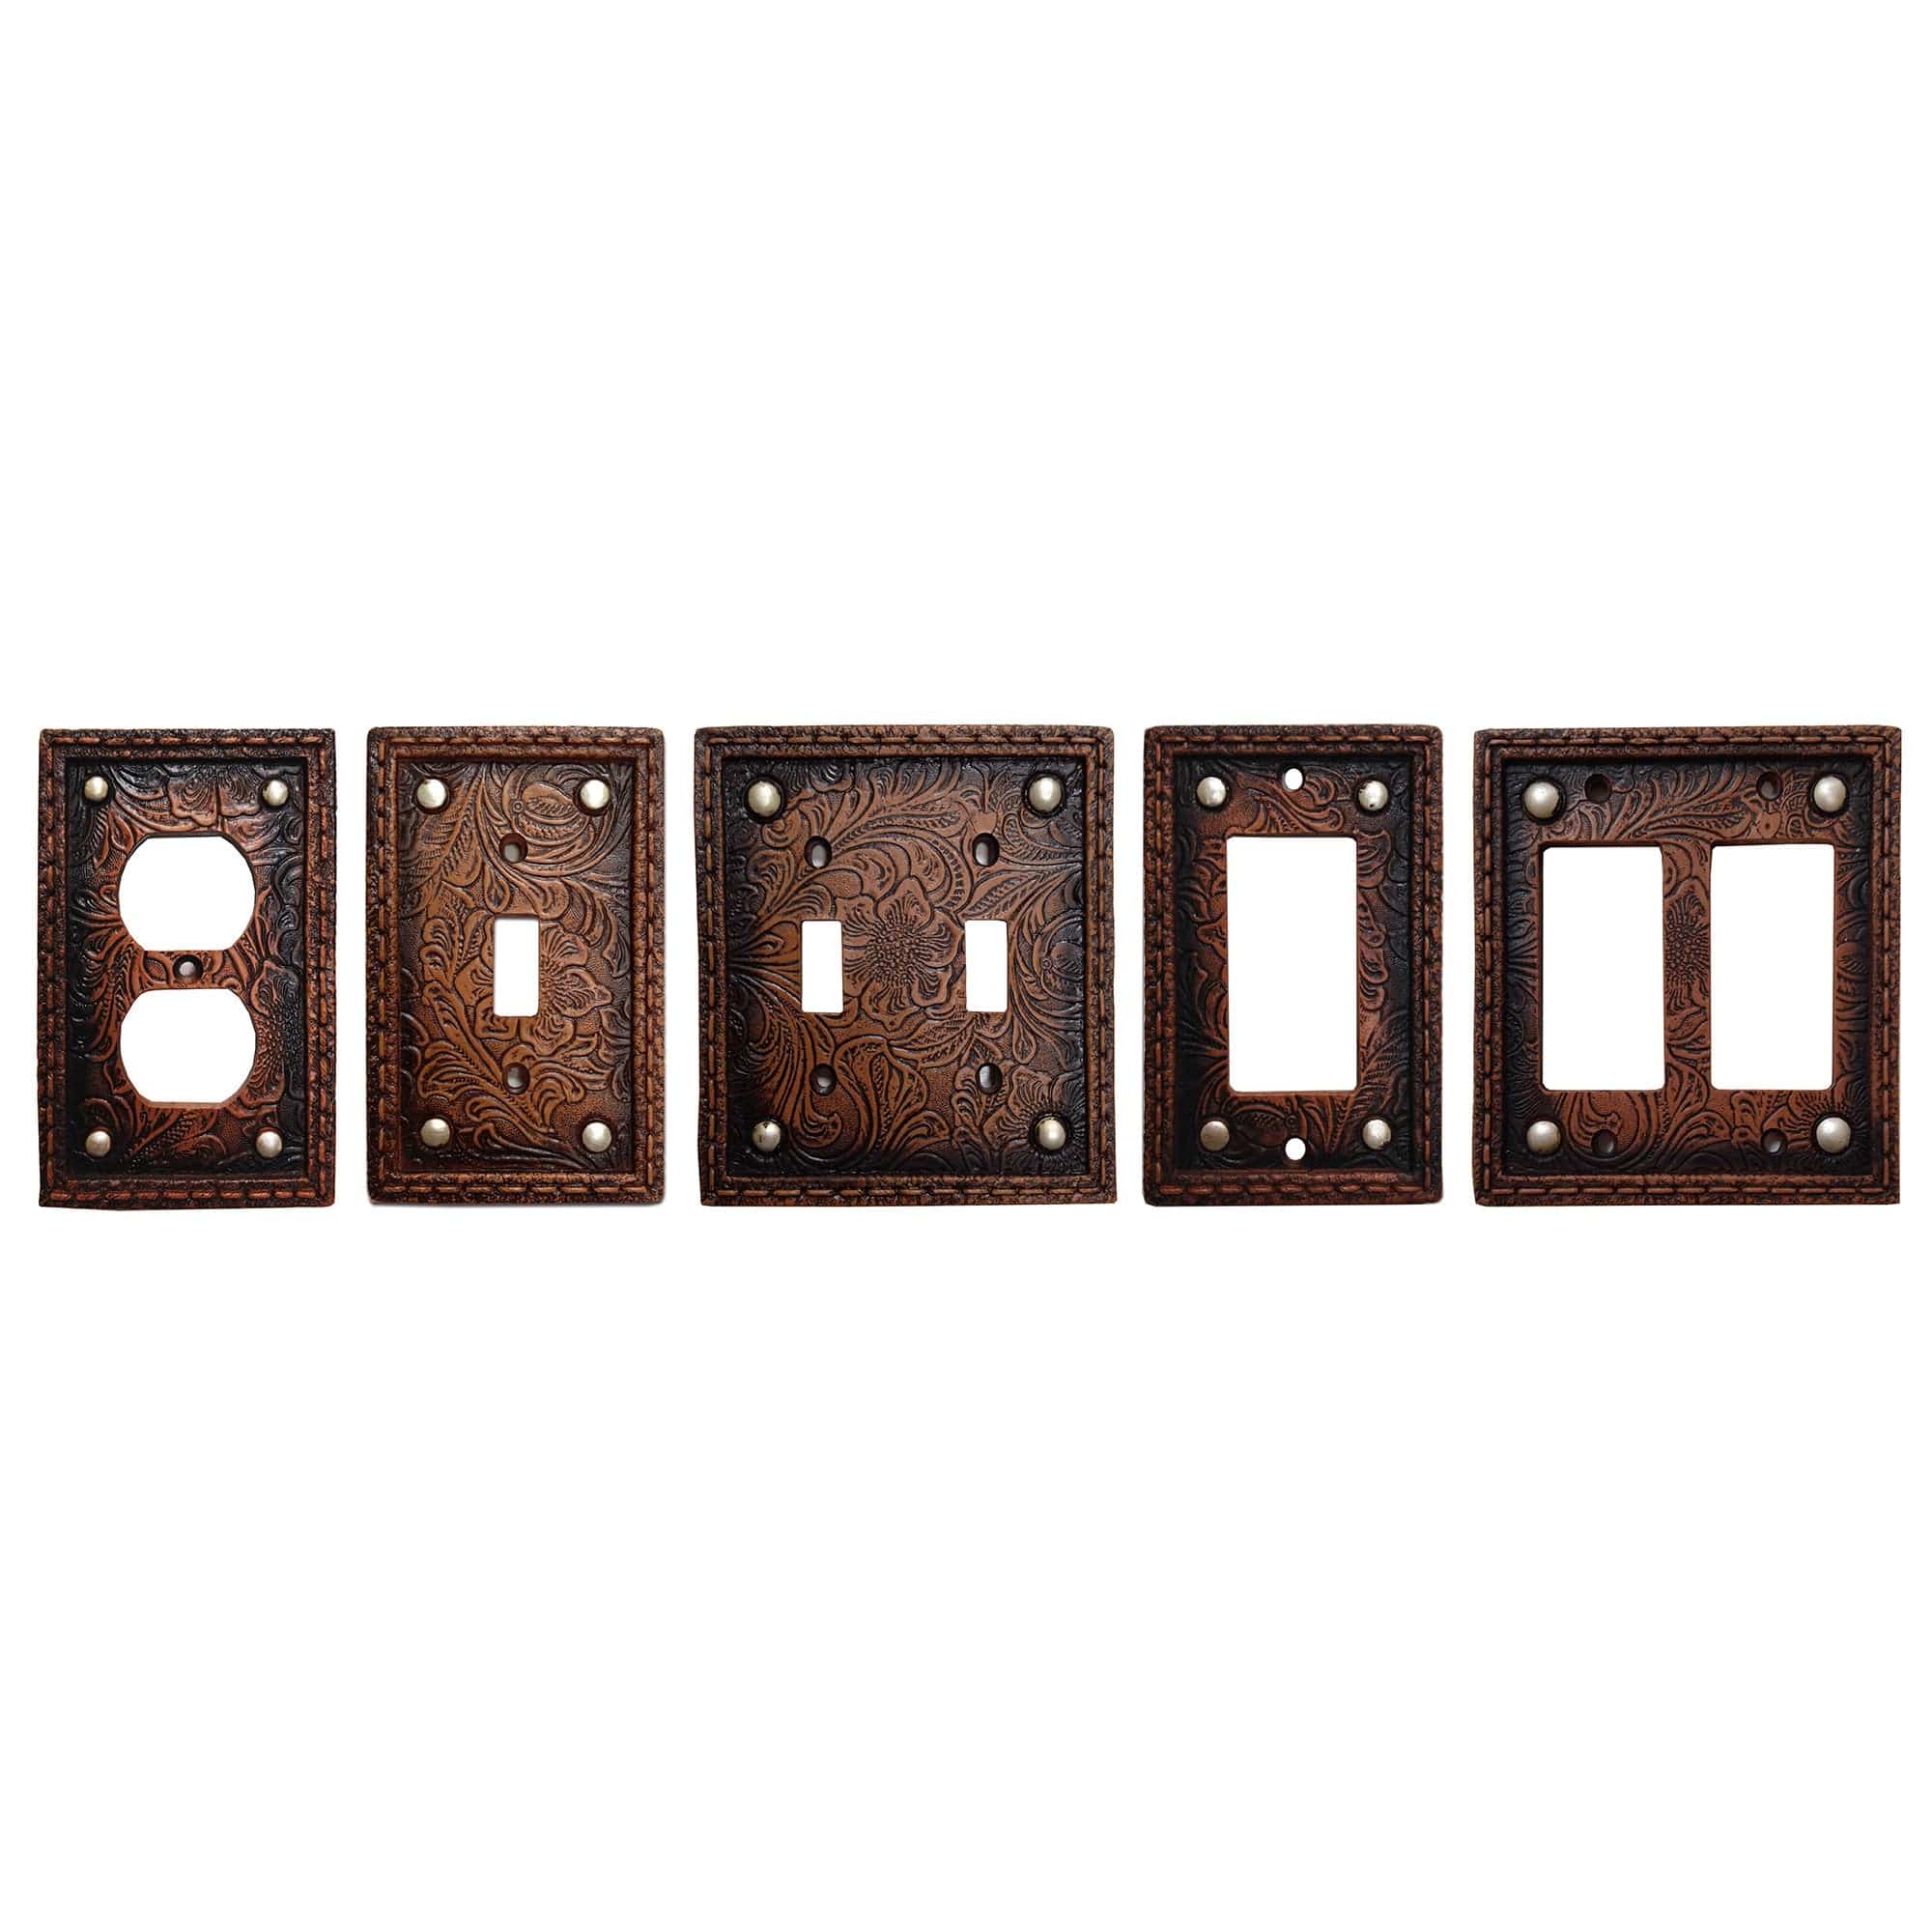 Tooled Resin w/ Stud Single Rocker Wall Switch Plate Switch Plates & Outlet Covers